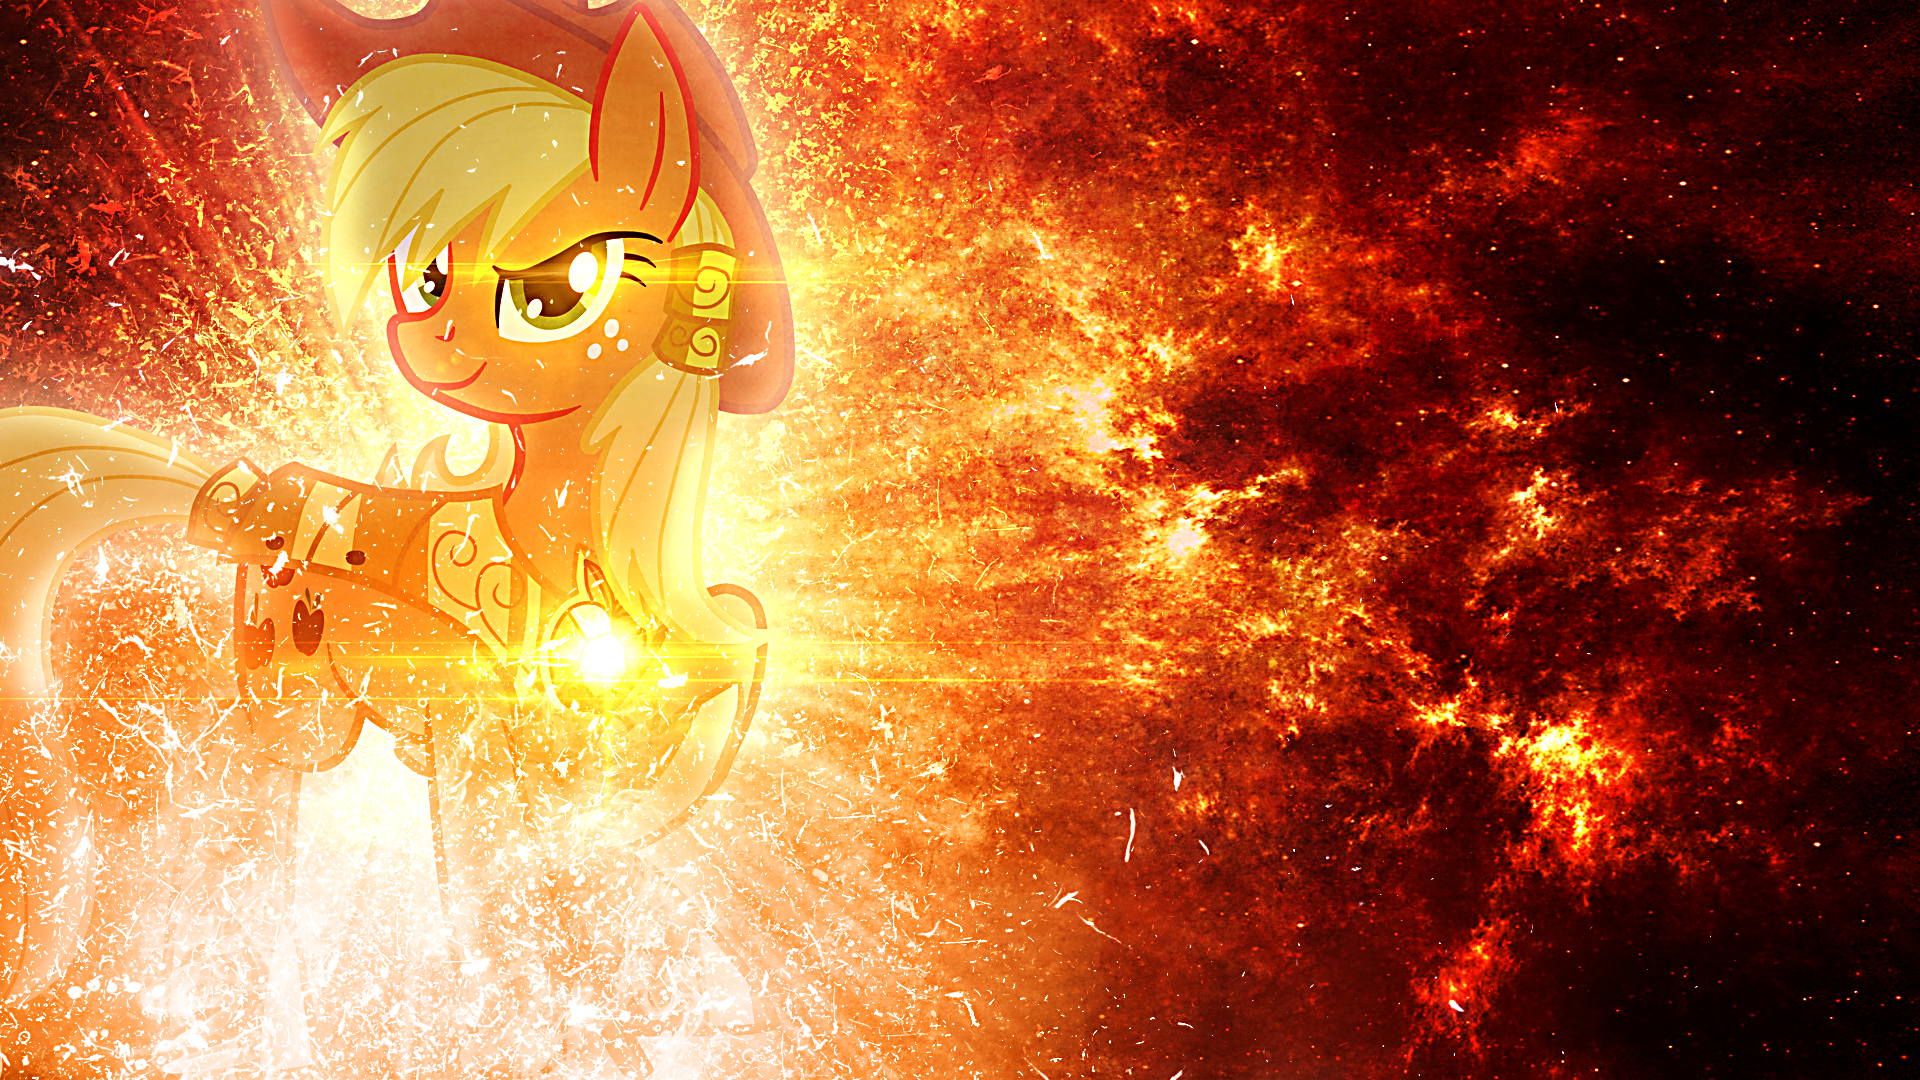 Applejack Guardian Of Honesty - Wallpaper by Equestria-Prevails, JennieOo and Tzolkine